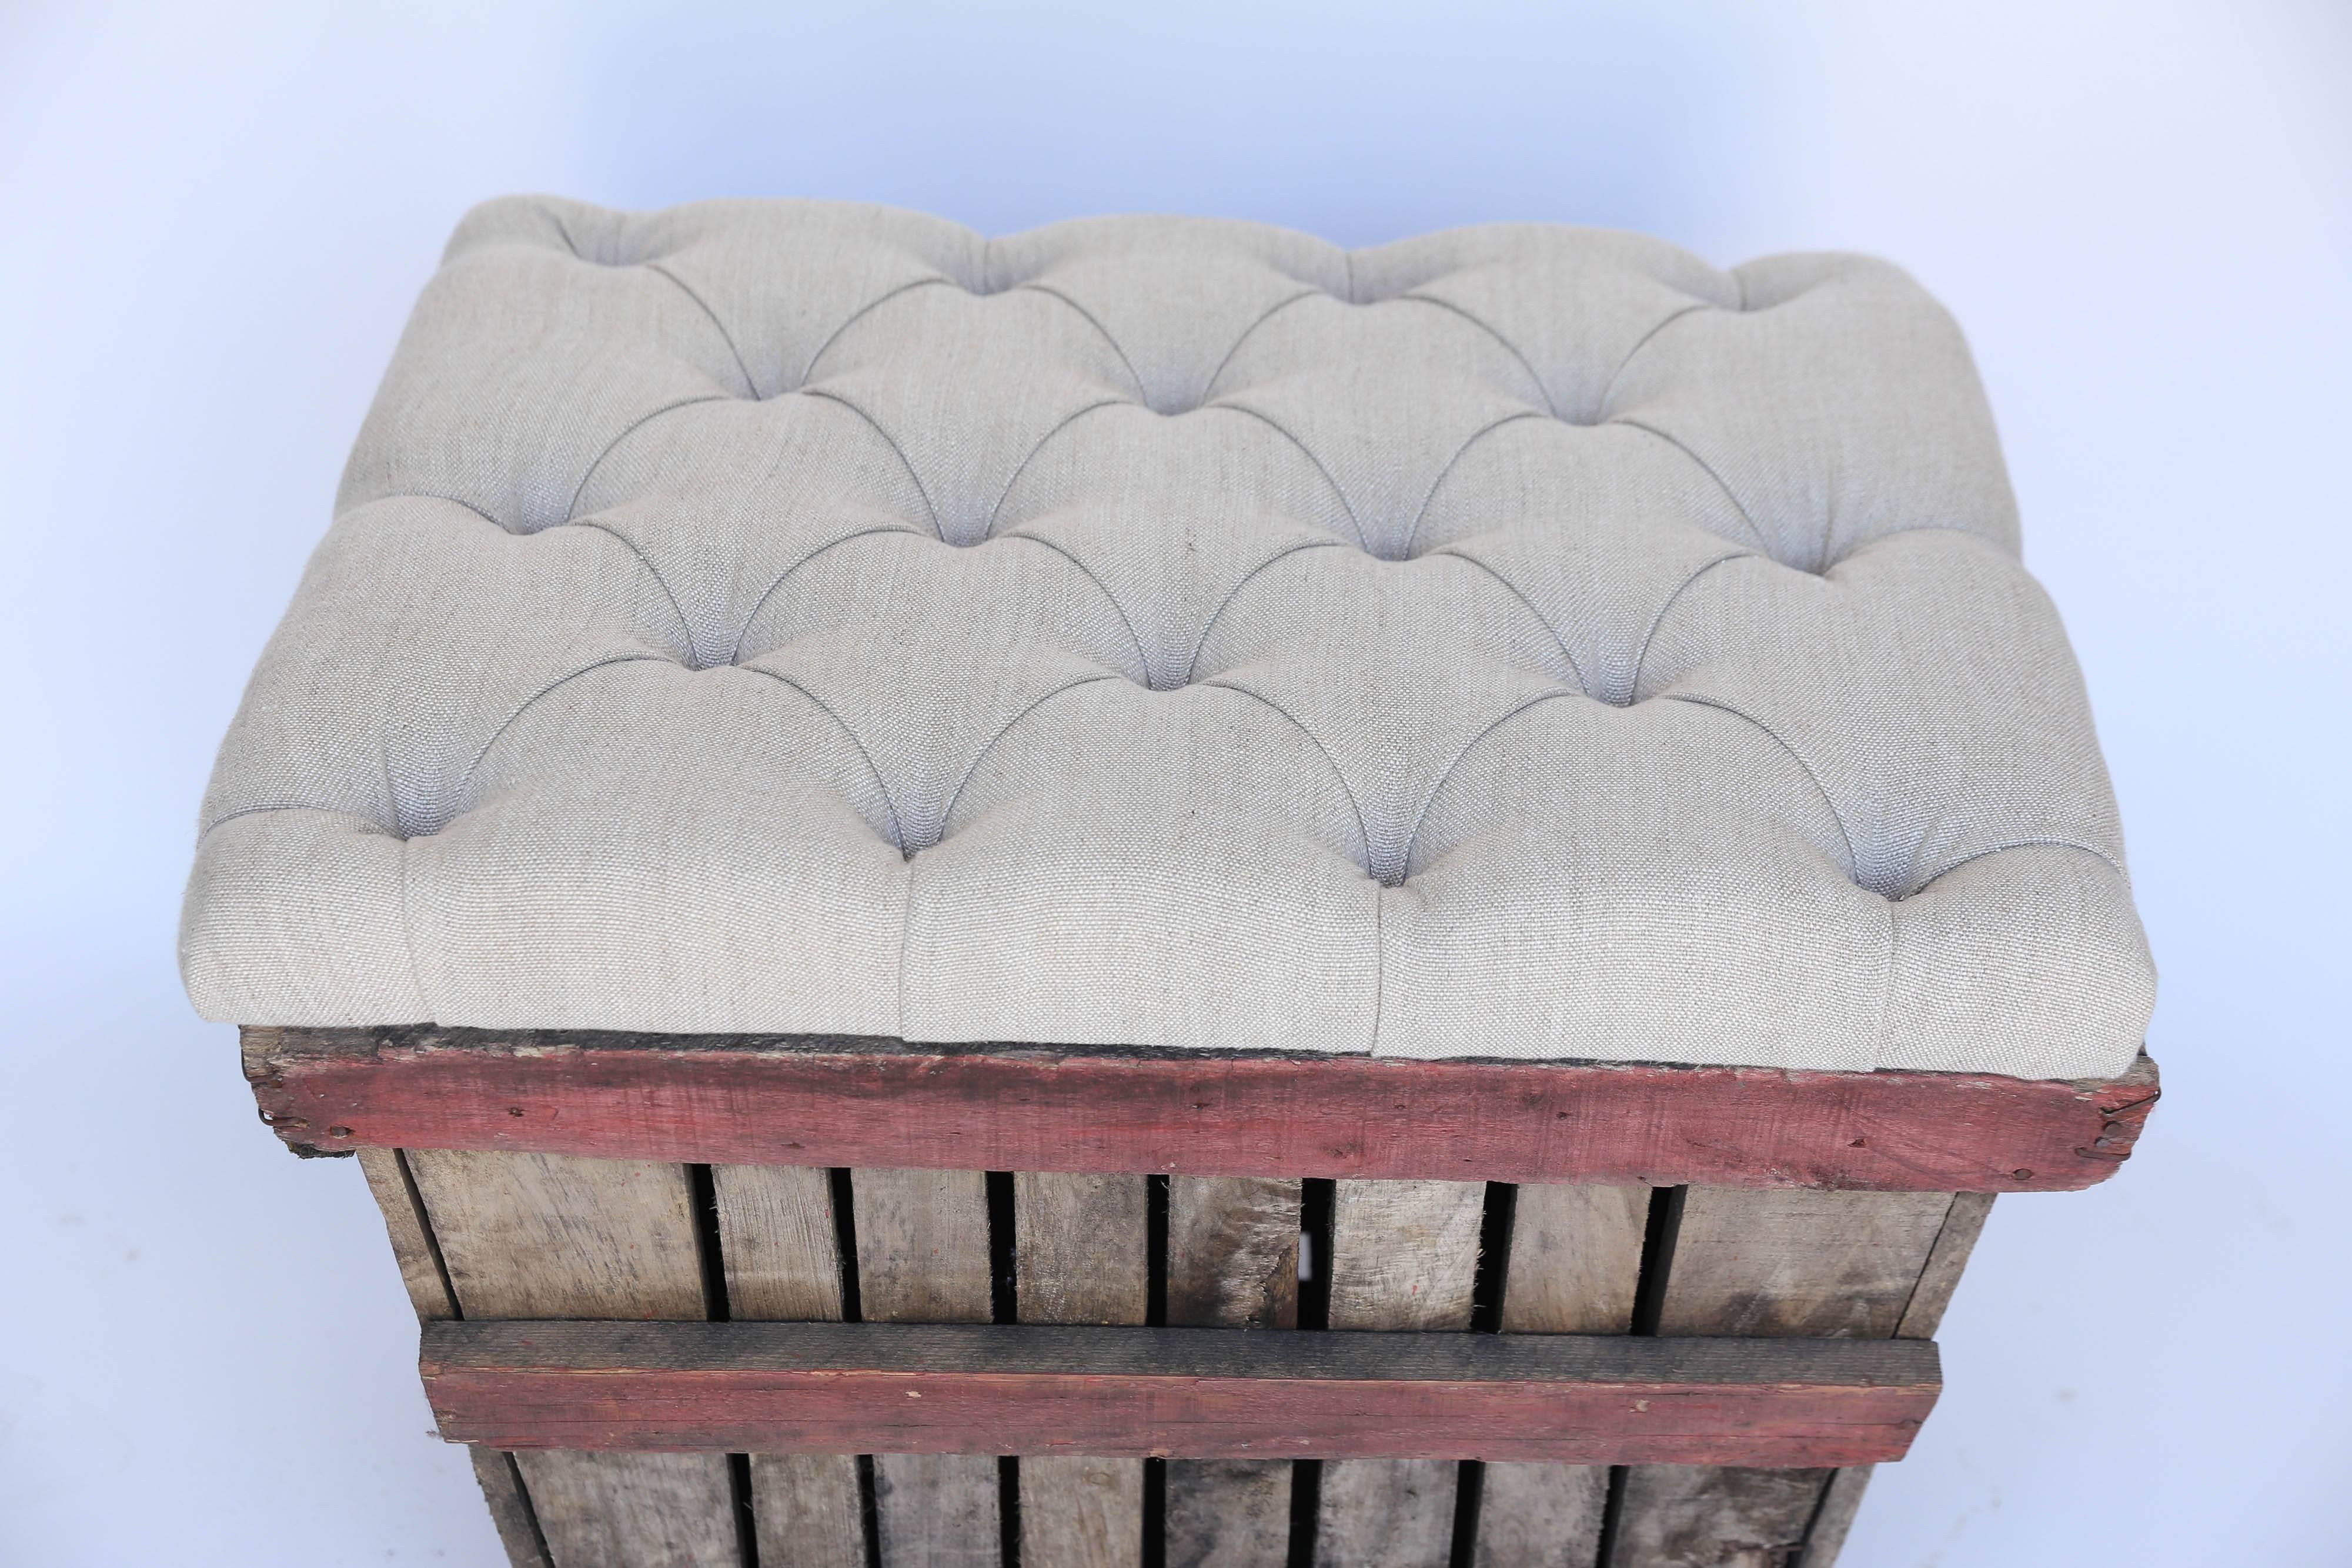 A old grape crate becomes a wonderful bench with the addition of an attached cushion of tufted linen. Tufted with covered buttons, the dressy linen top is in contrast to the rustic wooden bottom. The top is hinged and the interior affords room for